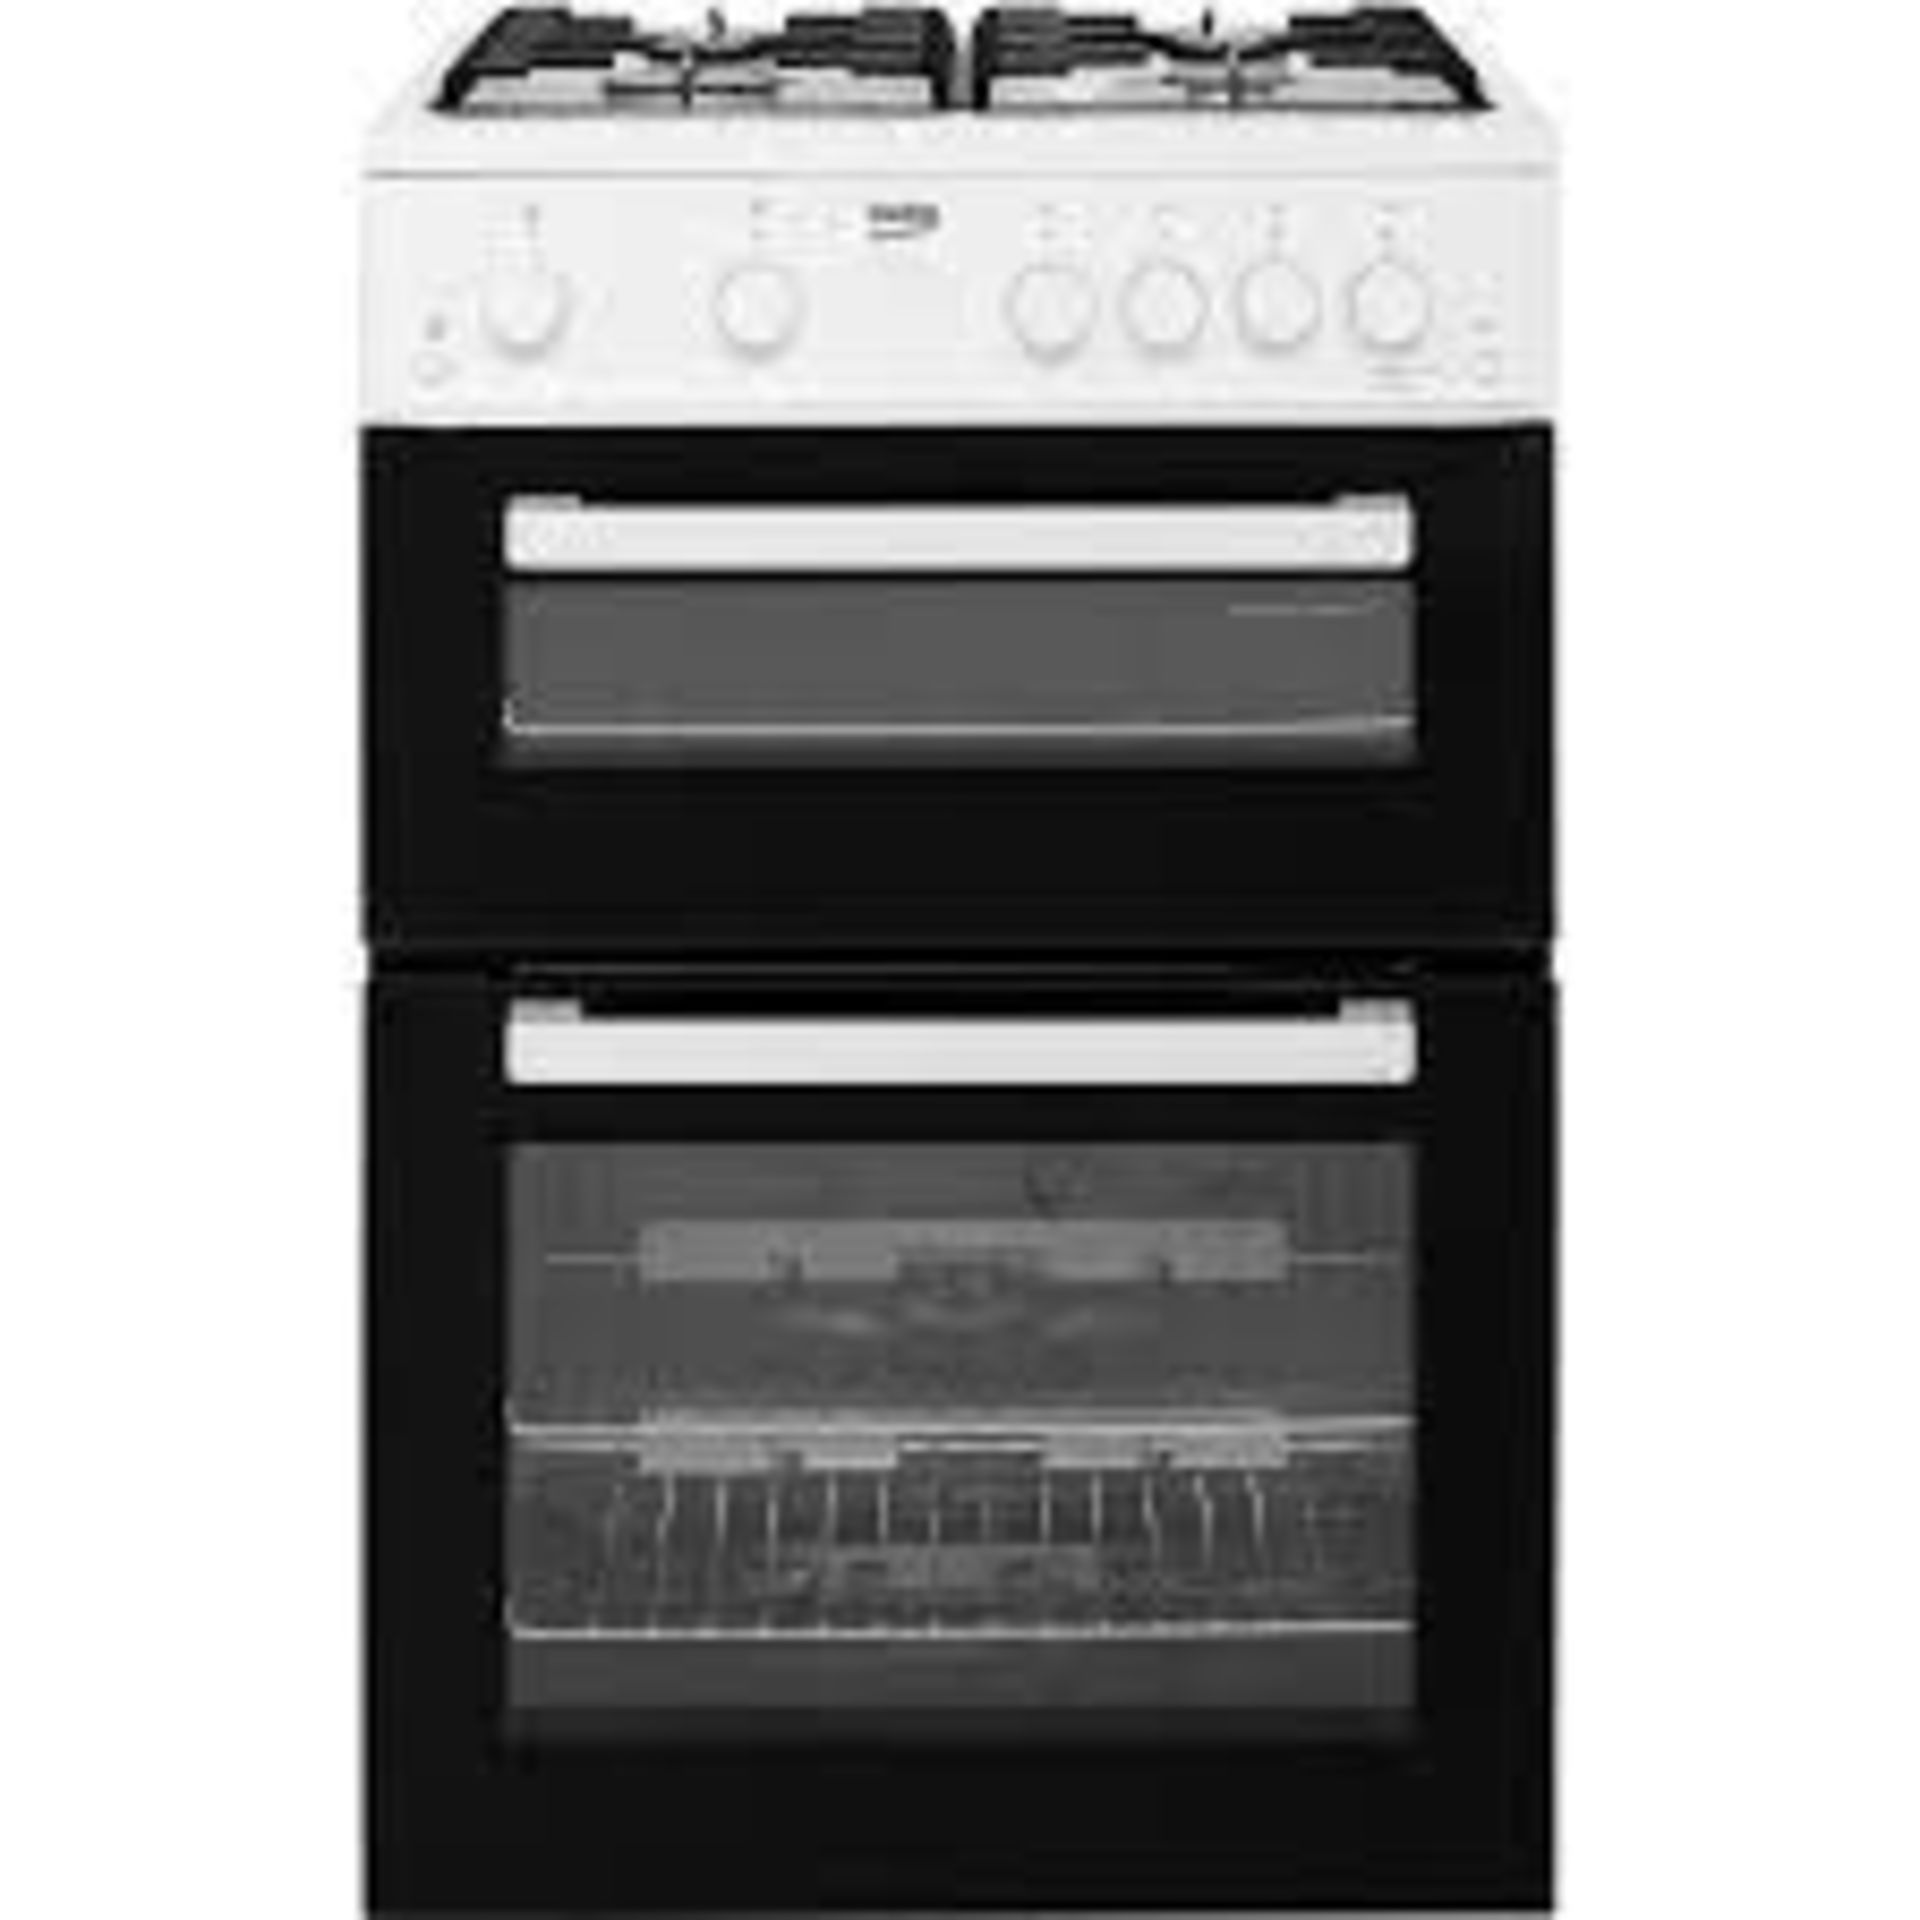 (AG34) New Beko Freestanding 60cm Gas Cooker. RRP £379.00 Perfect for big, busy families, this gas